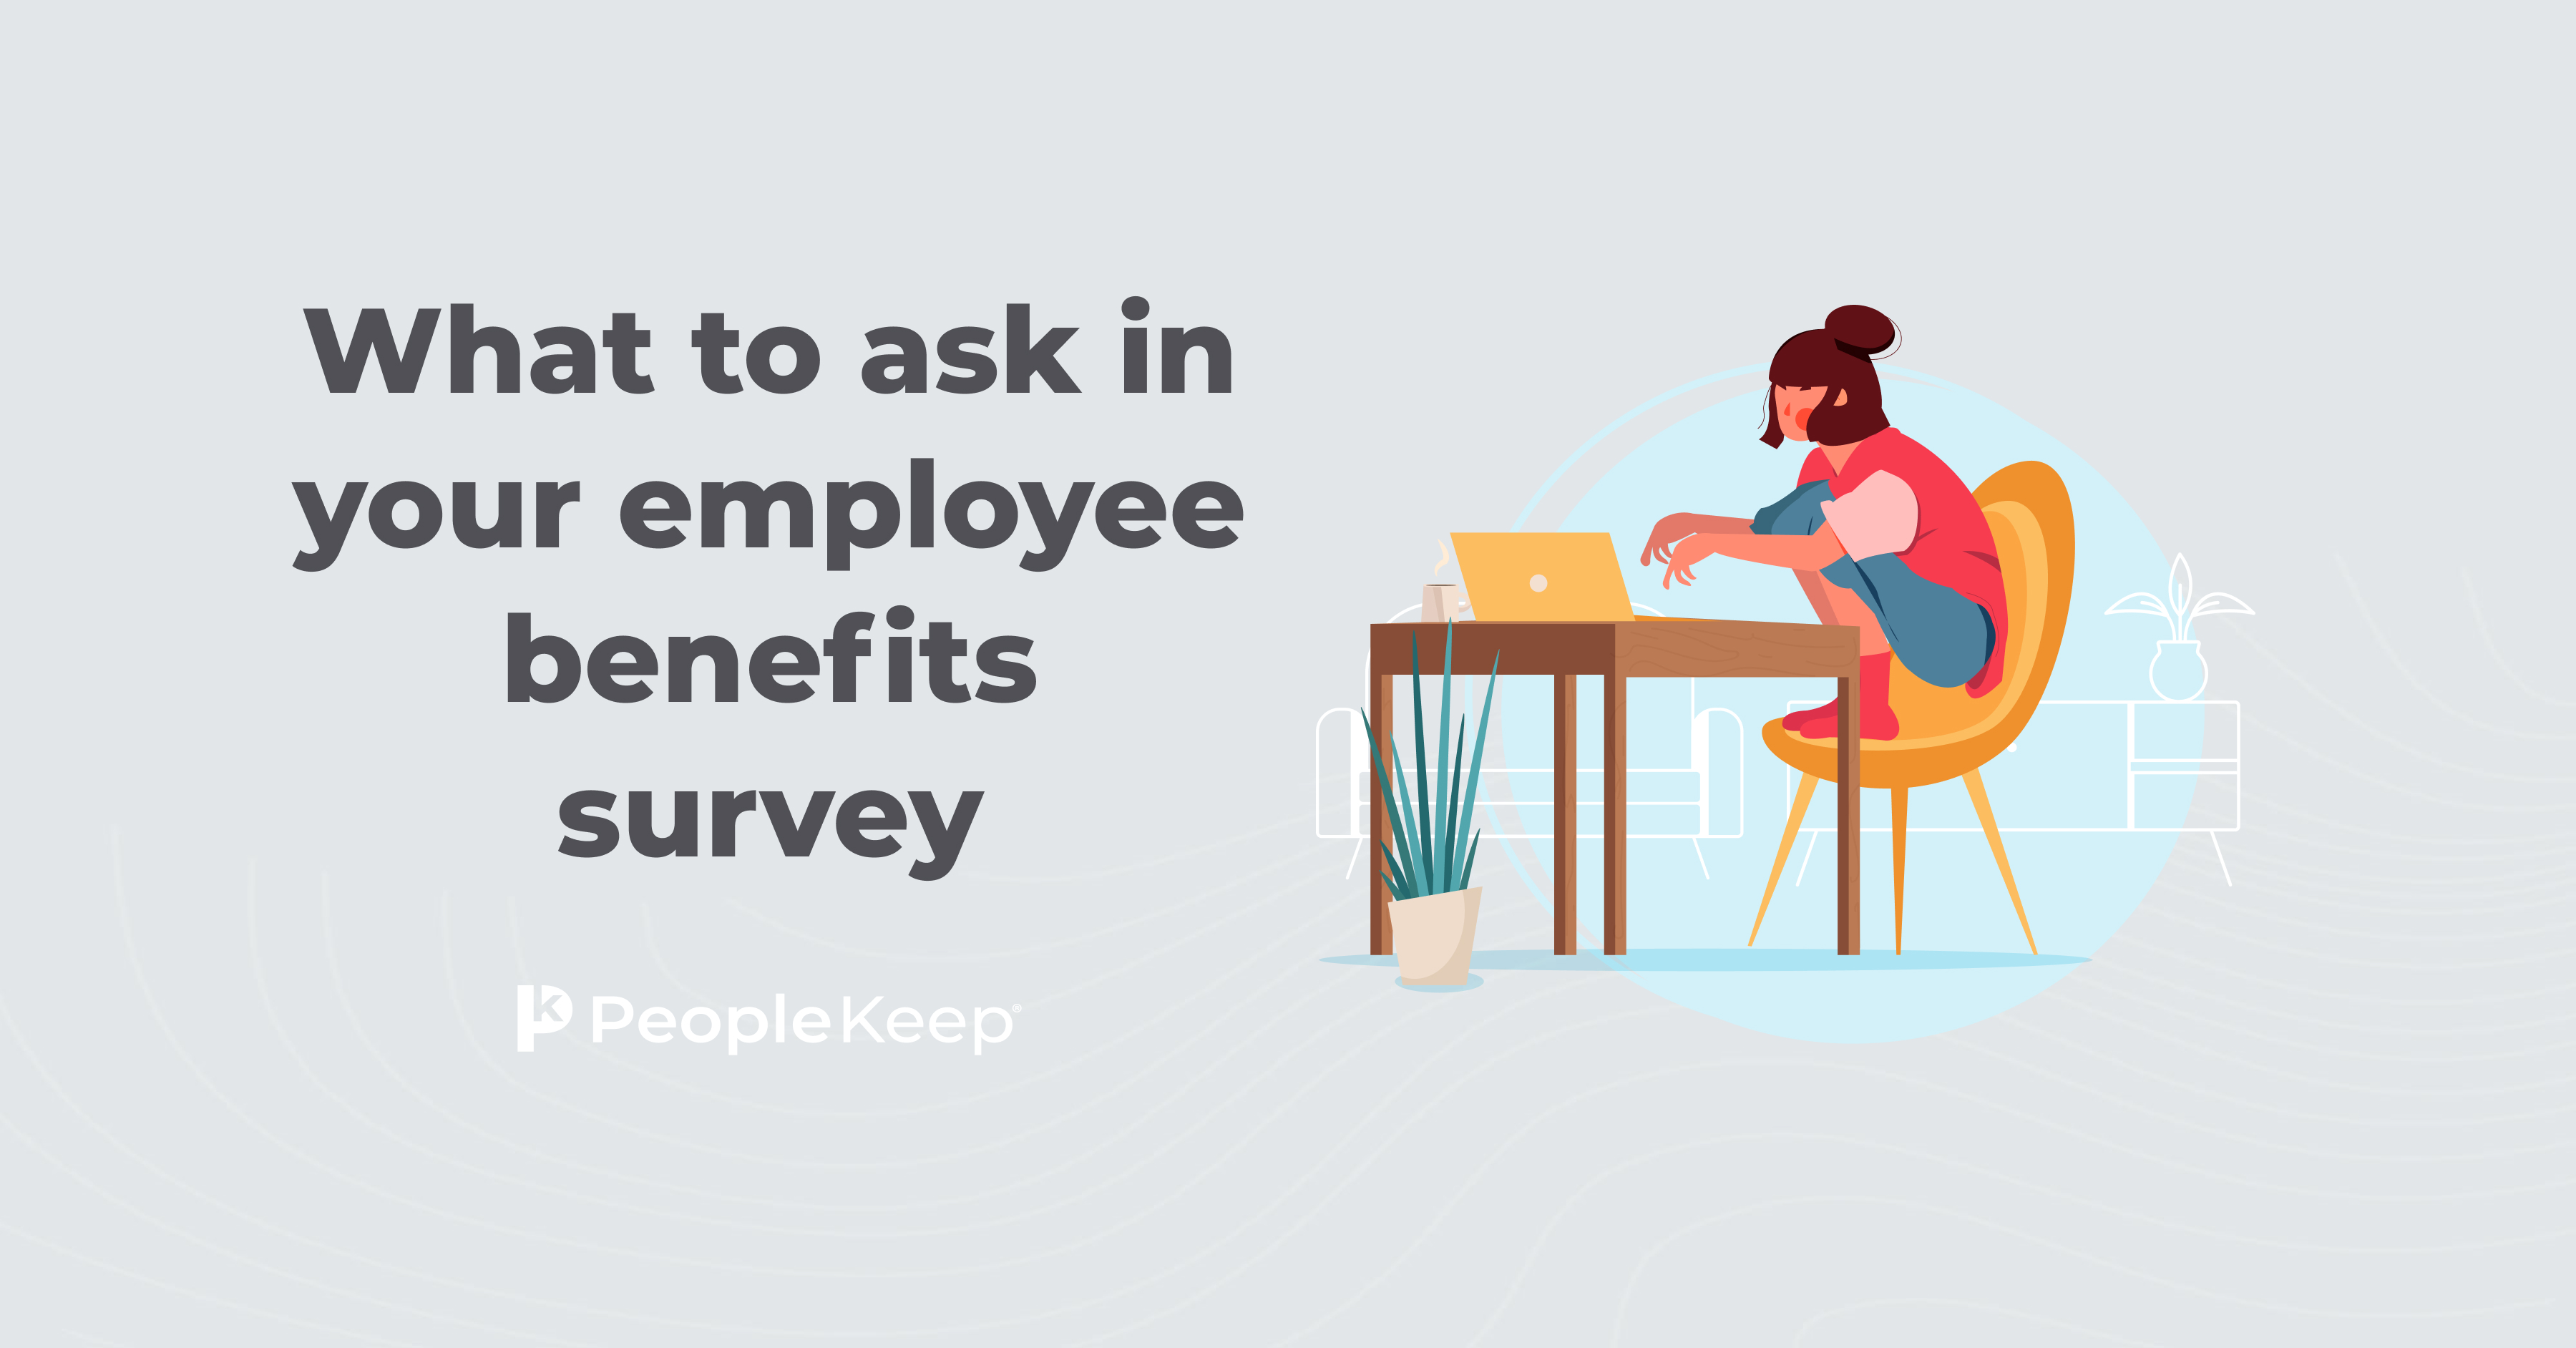 What to ask in your employee benefits survey